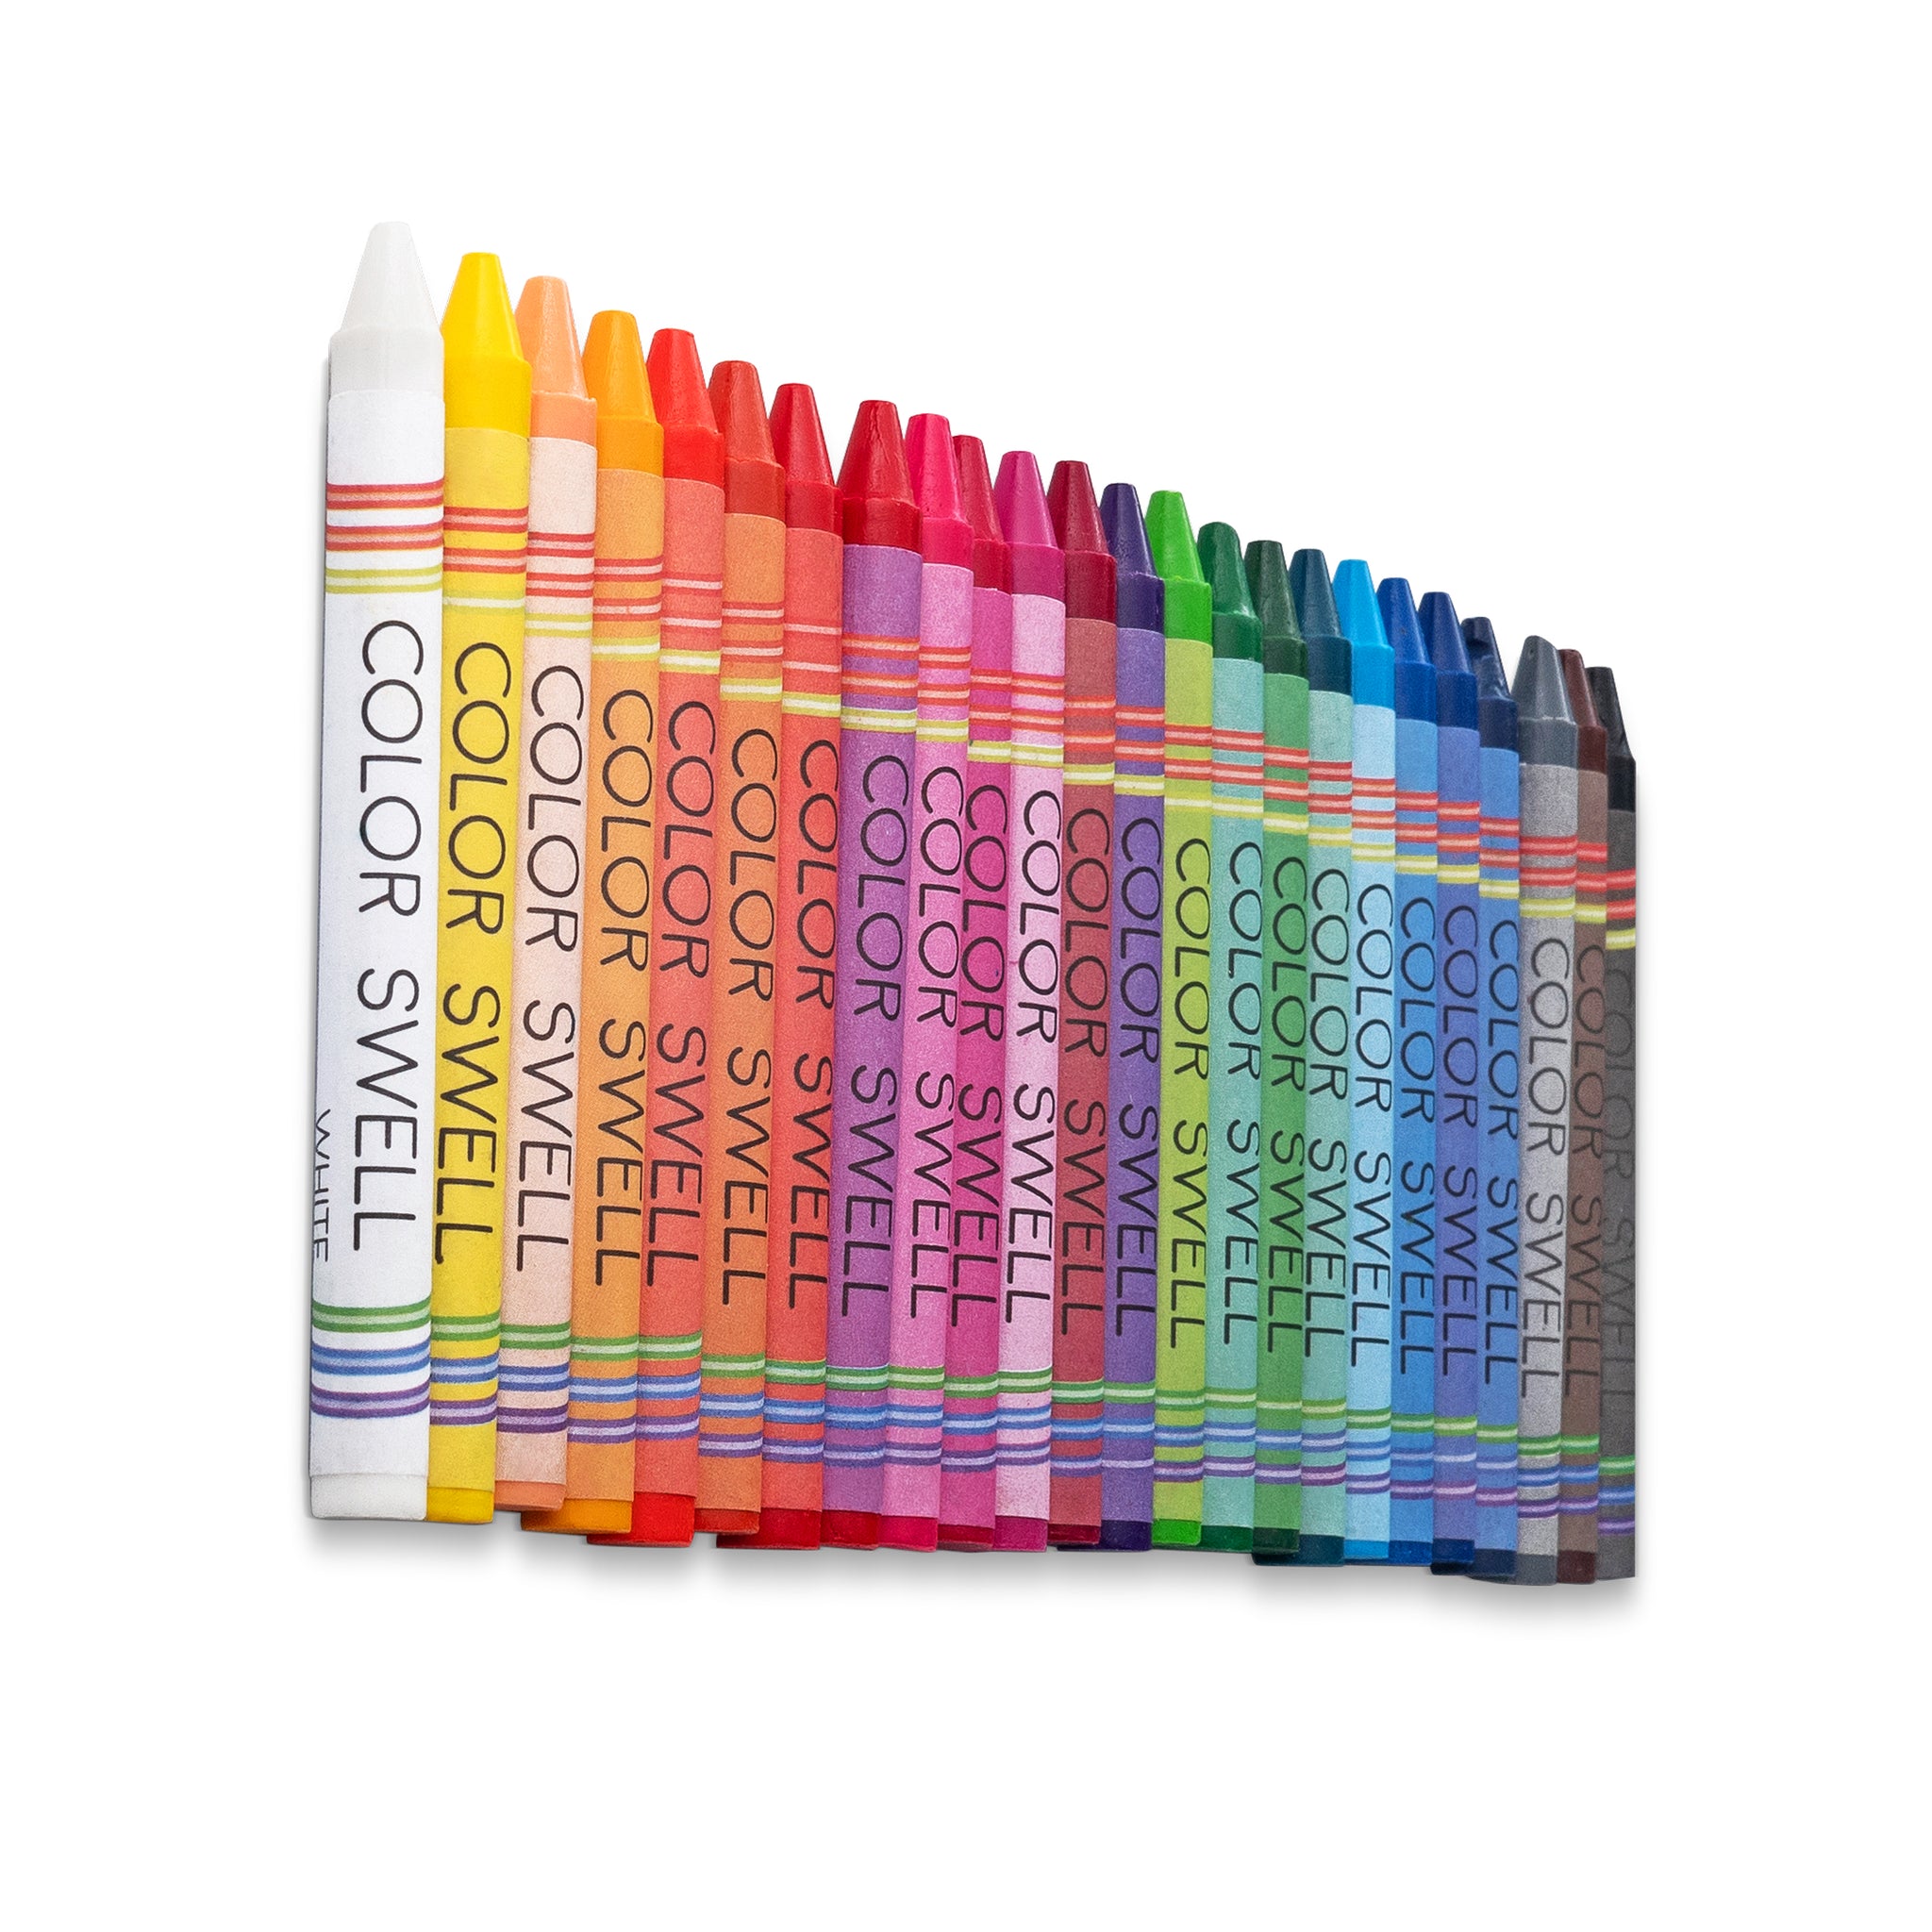 Color Swell Bulk Crayon Packs - 36 Boxes of 24 Vibrant Colored Durable Bulk  Crayons of Teacher Quality for Classroom and Home